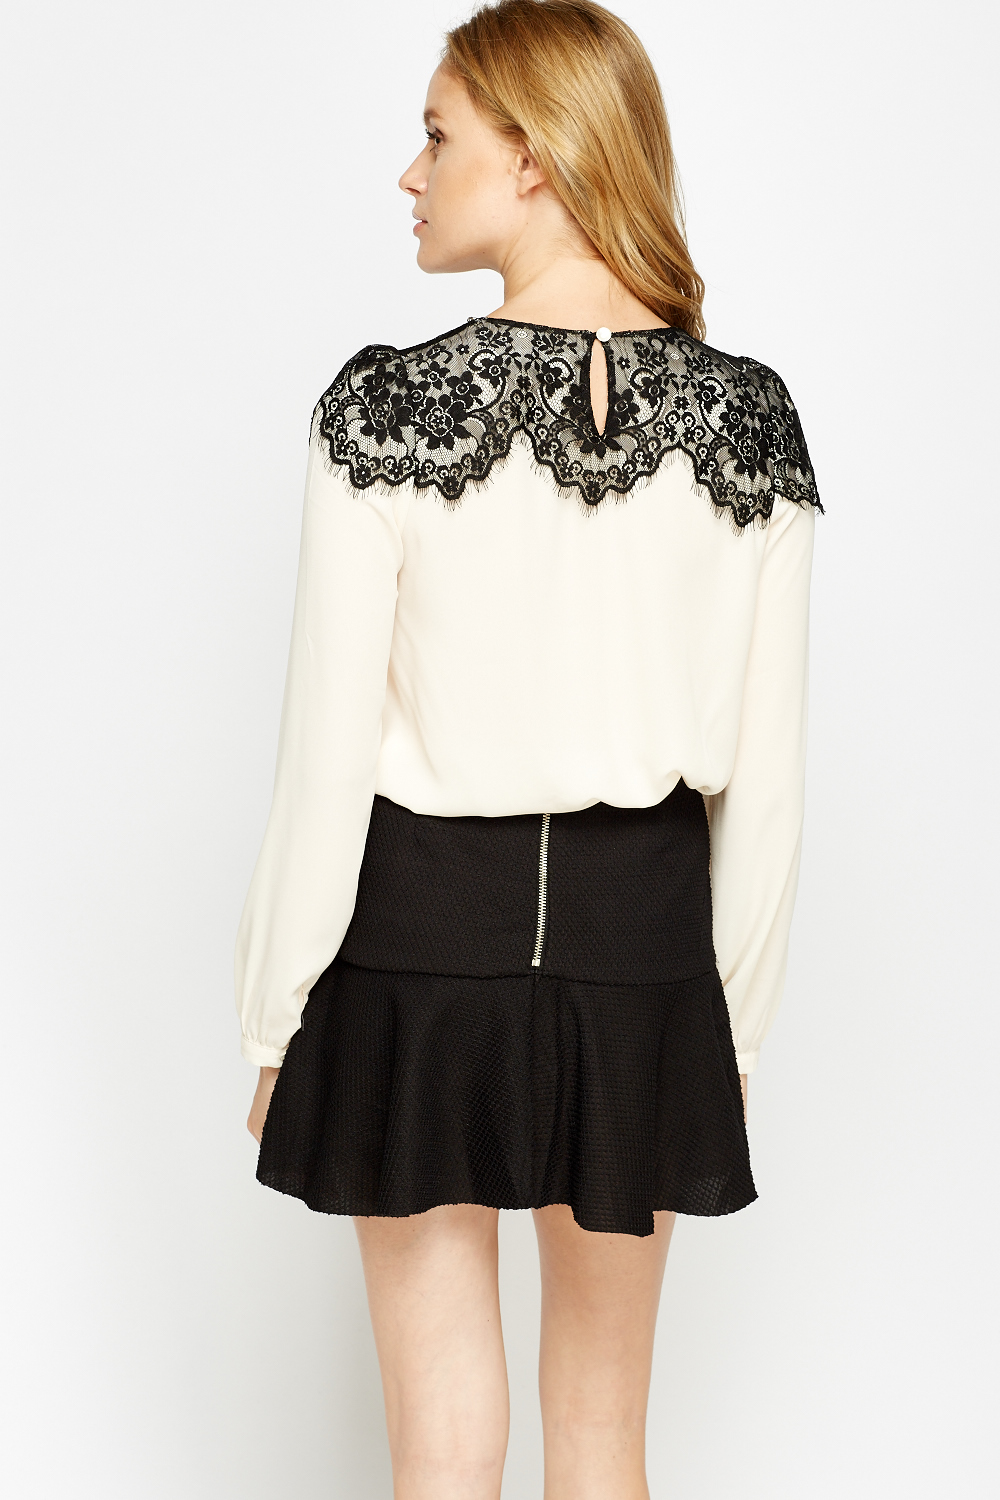 Lace Panel Embellished Cream Blouse - Just $6